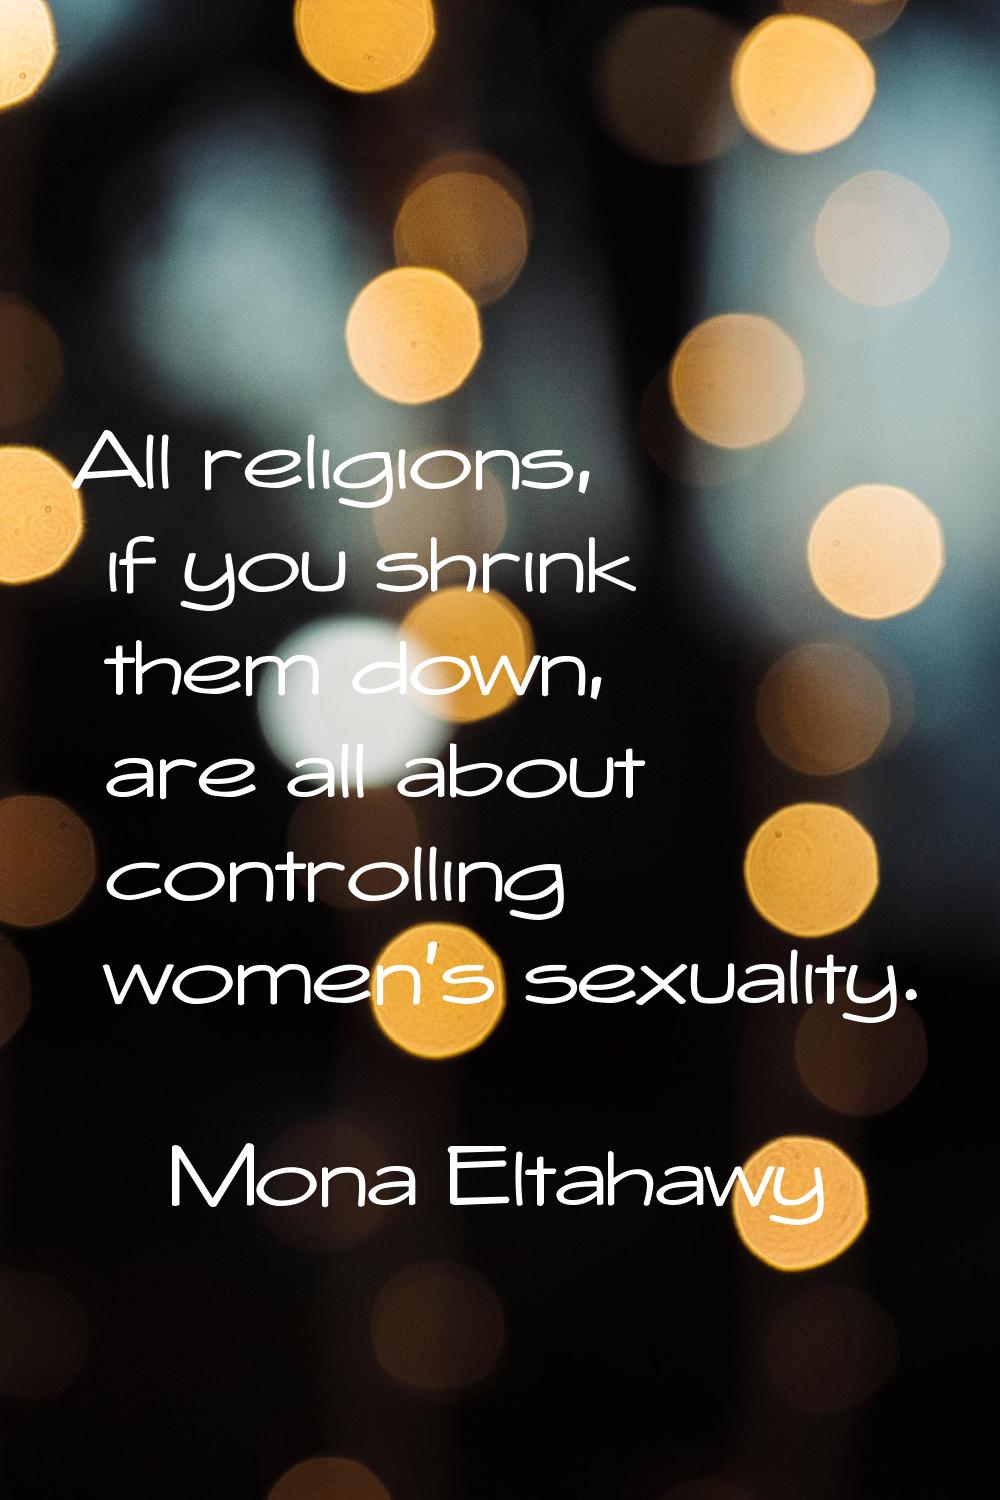 All religions, if you shrink them down, are all about controlling women's sexuality.